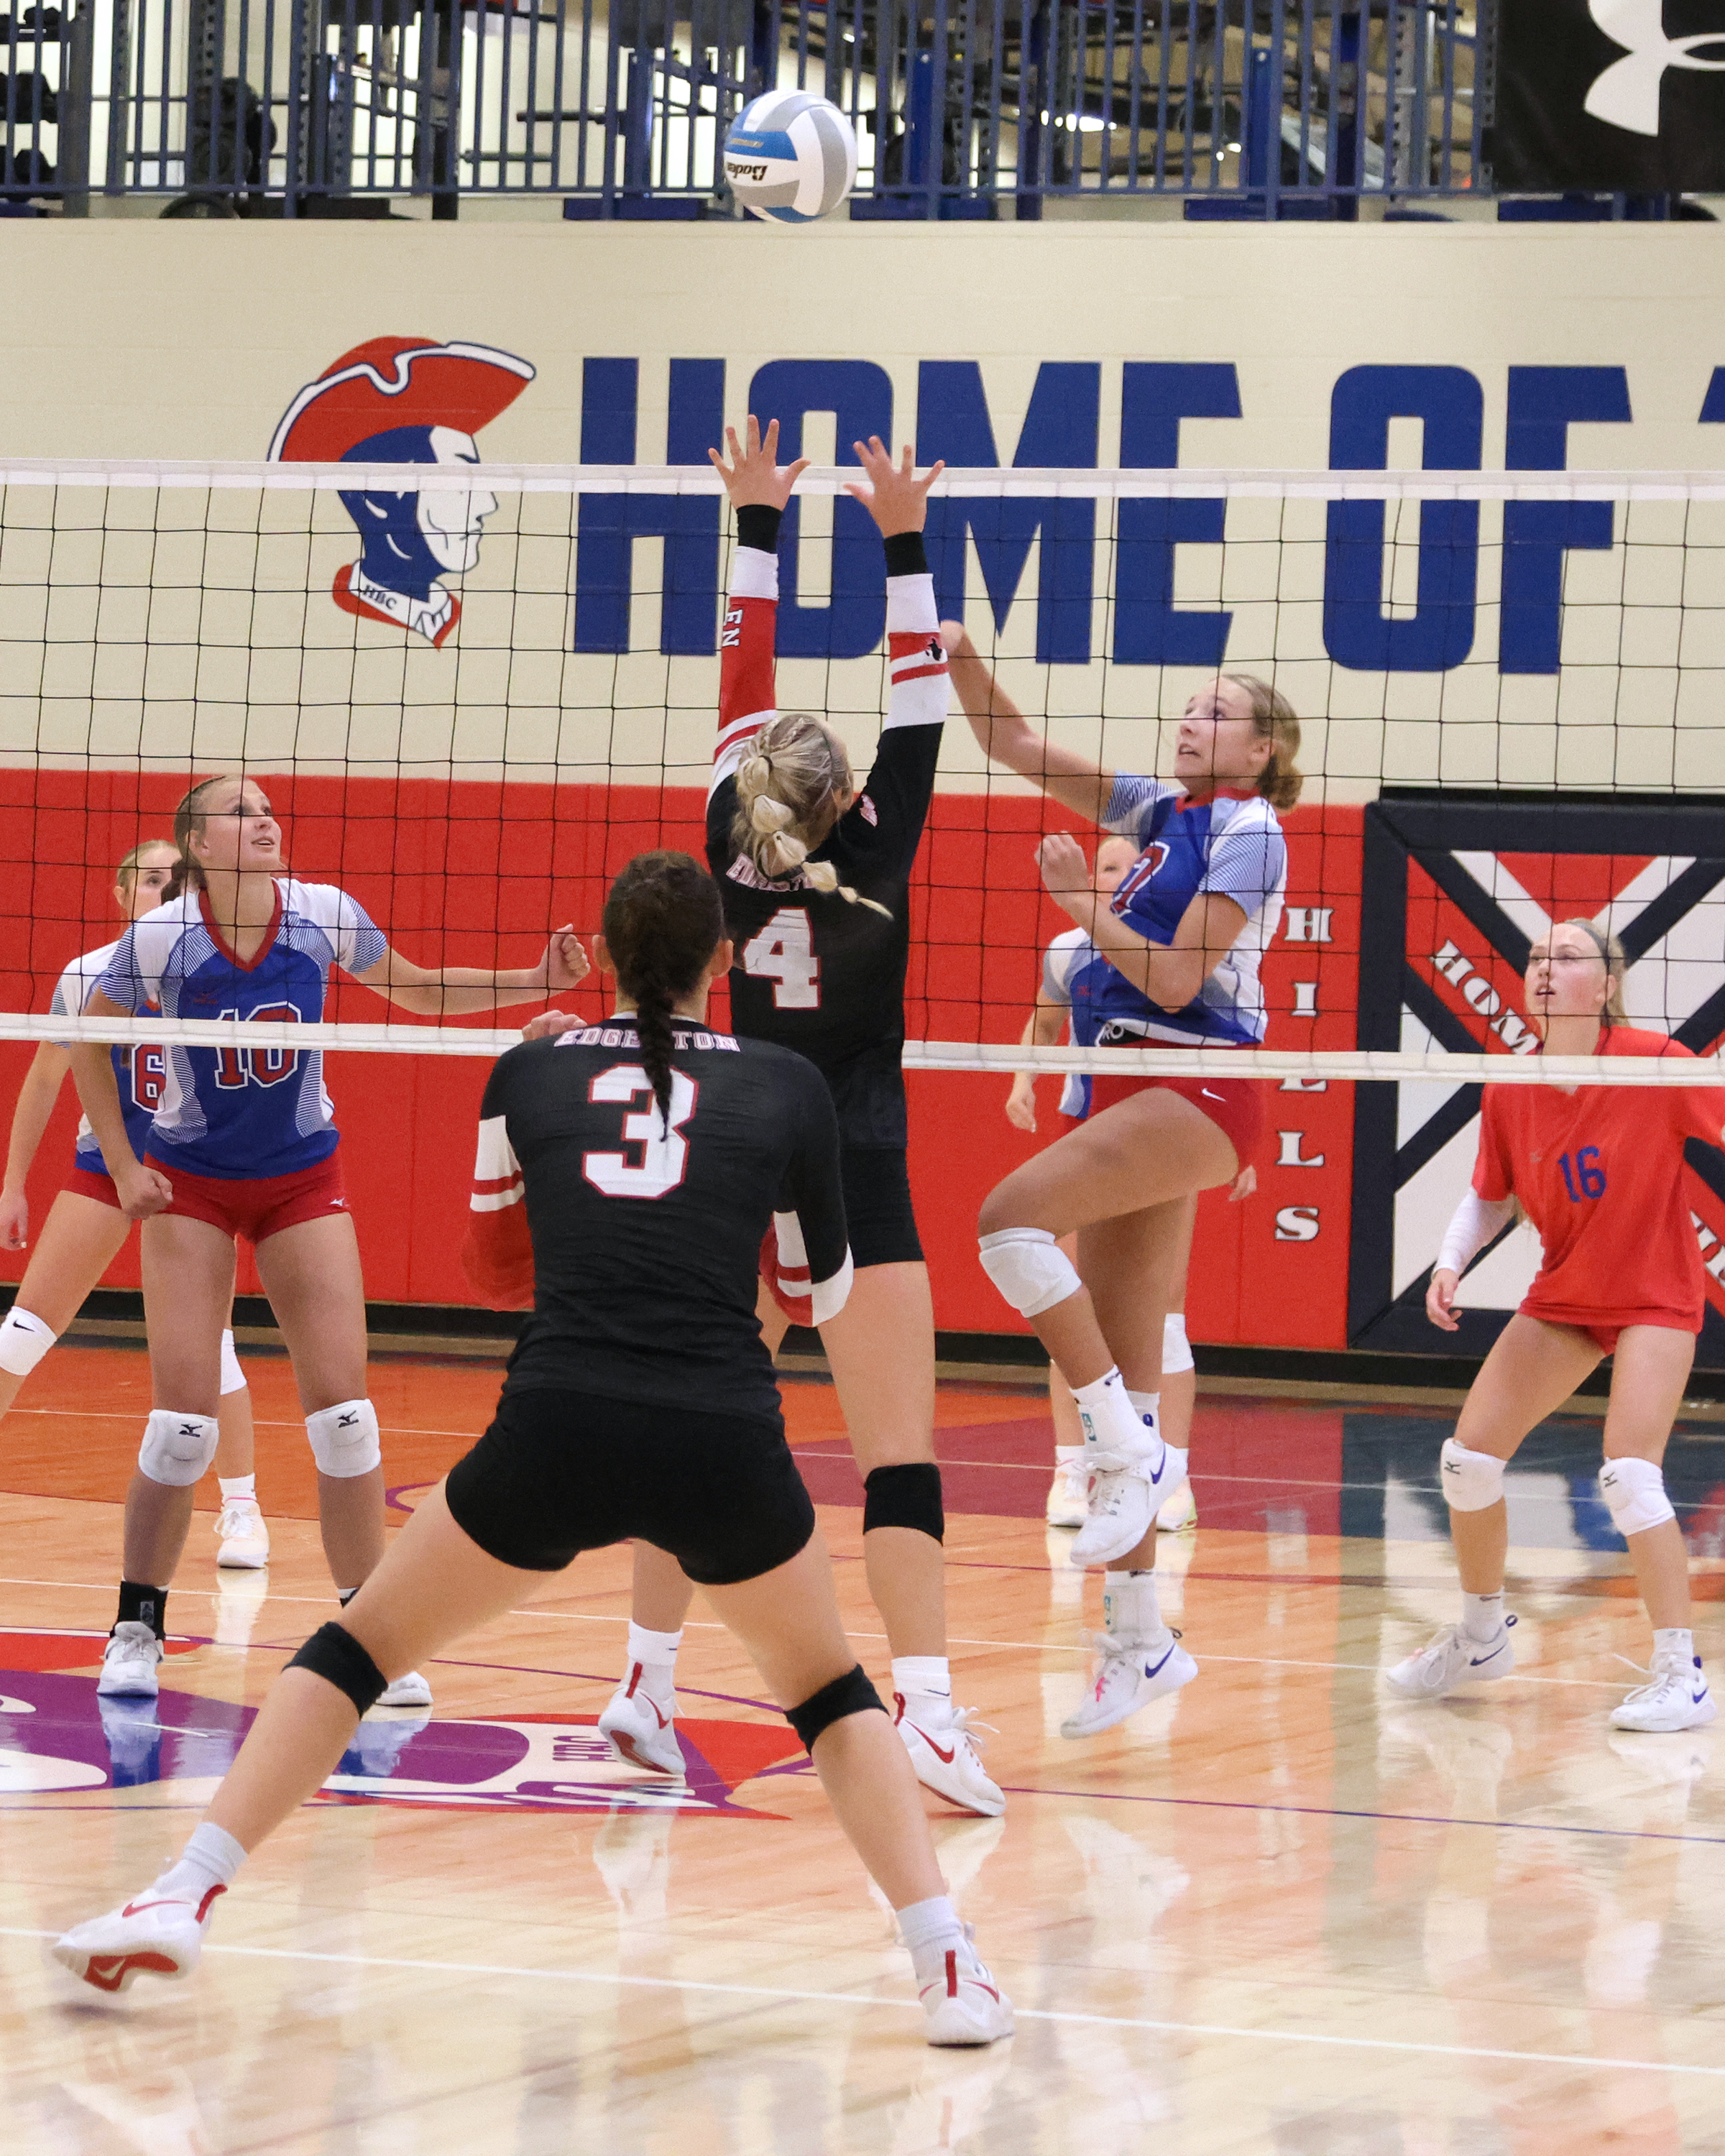 Sophomore Ella Sammons jumps for a ball on the Patriots’ side of the net against Edgerton Tuesday, Sept. 5, at home. The Patriots lost three close games to the Flying Dutchmen.